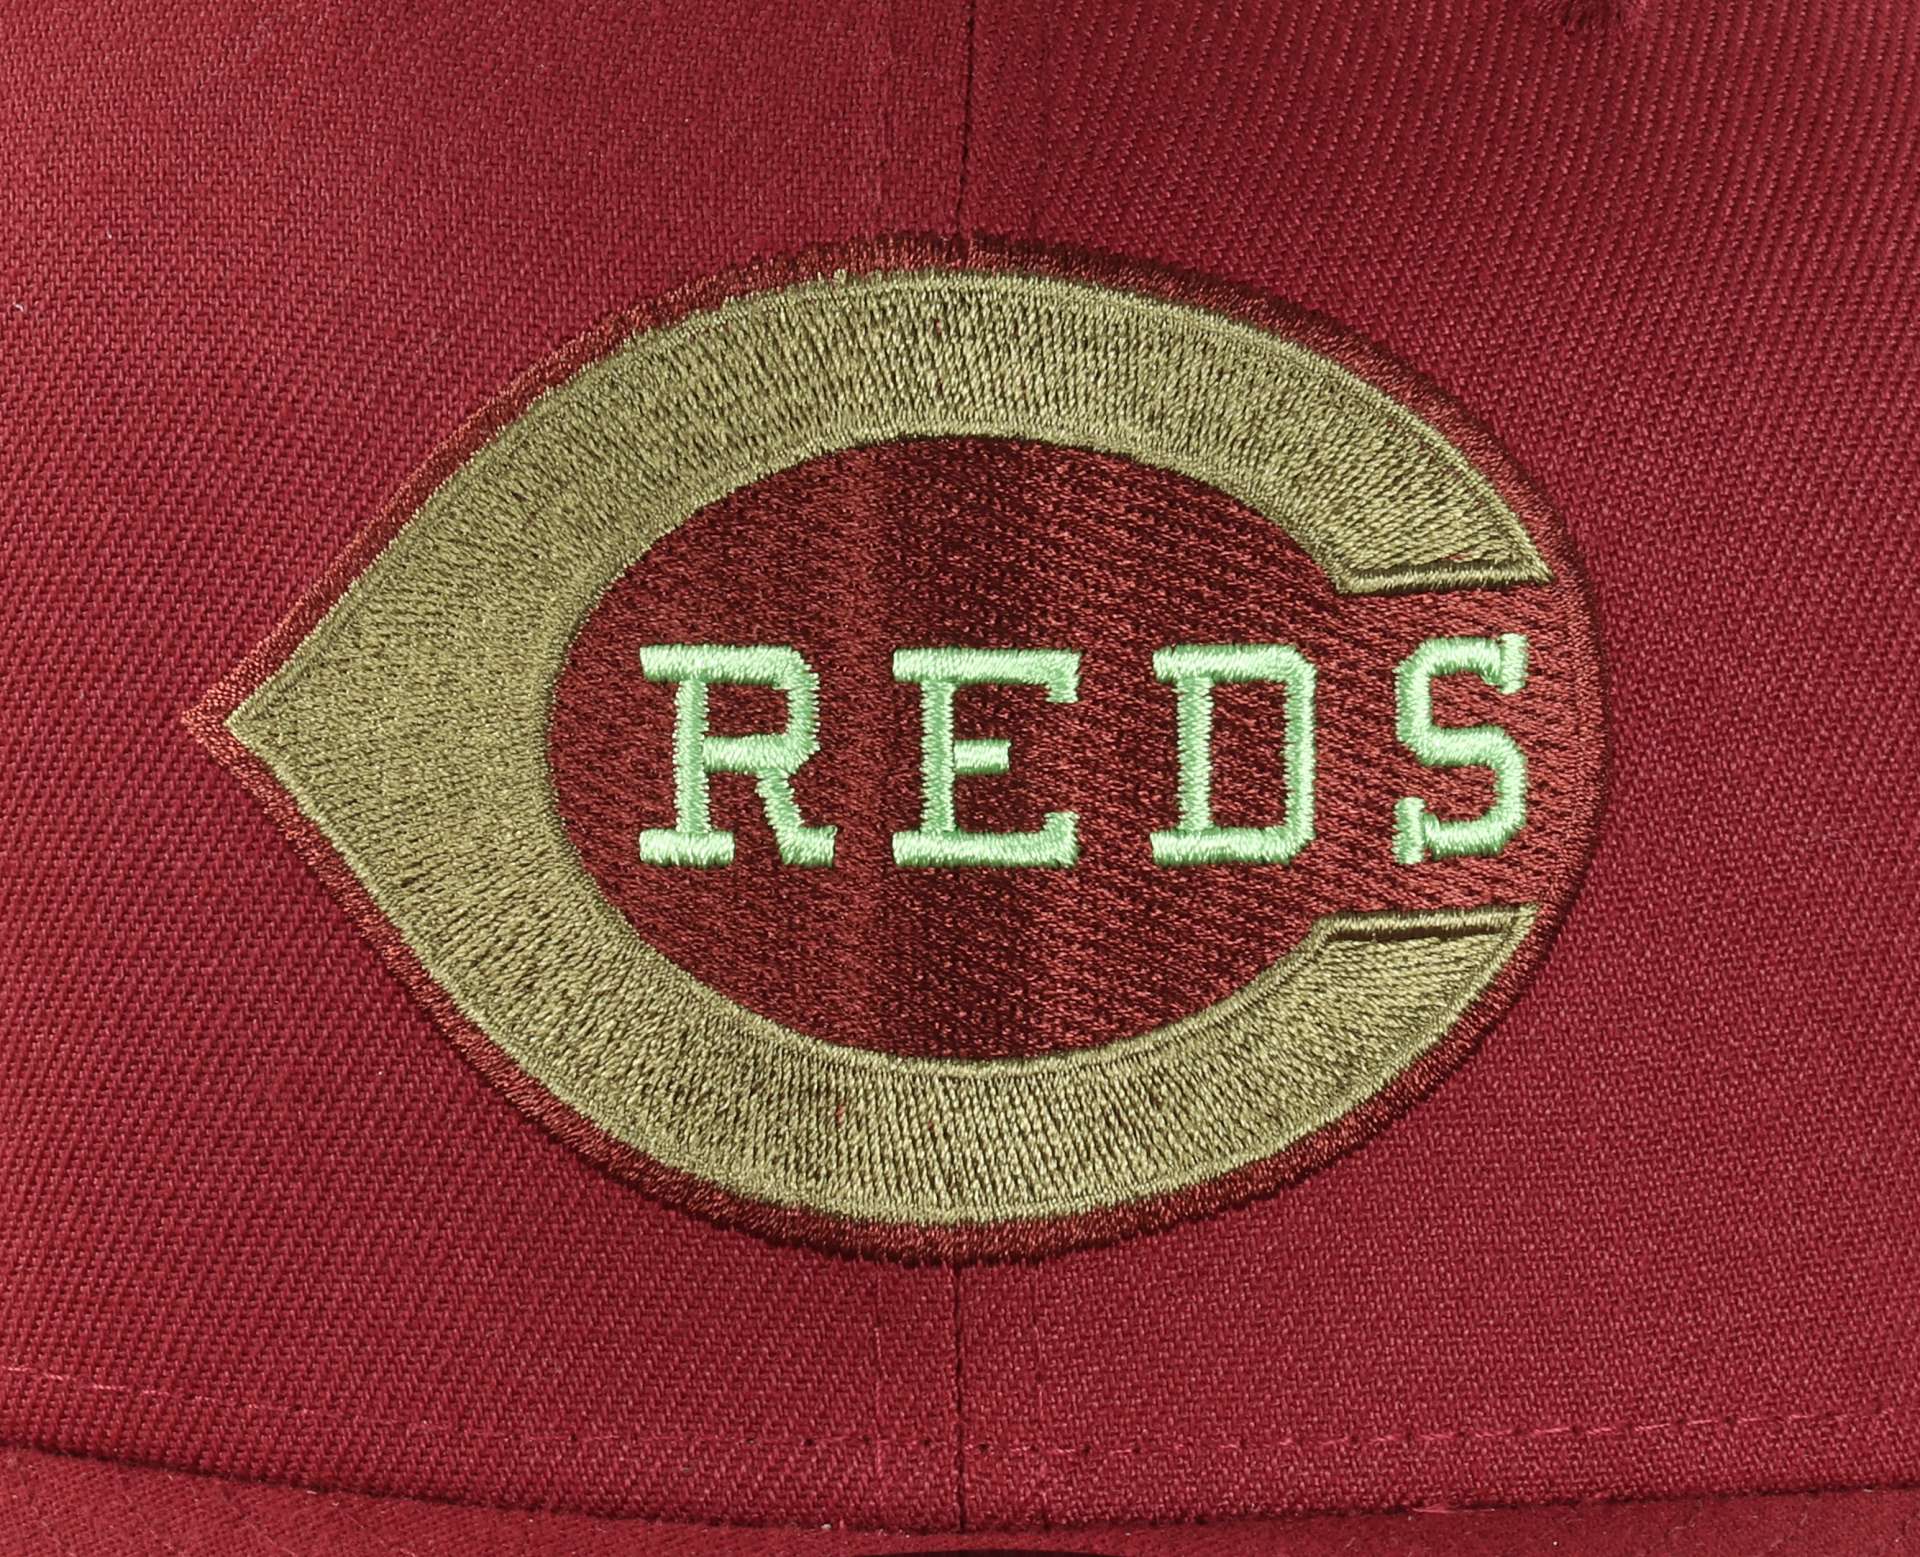 Cincinnati Reds Sidepatch MLB All-Star Game 1988 Red 59Fifty Basecap New Era